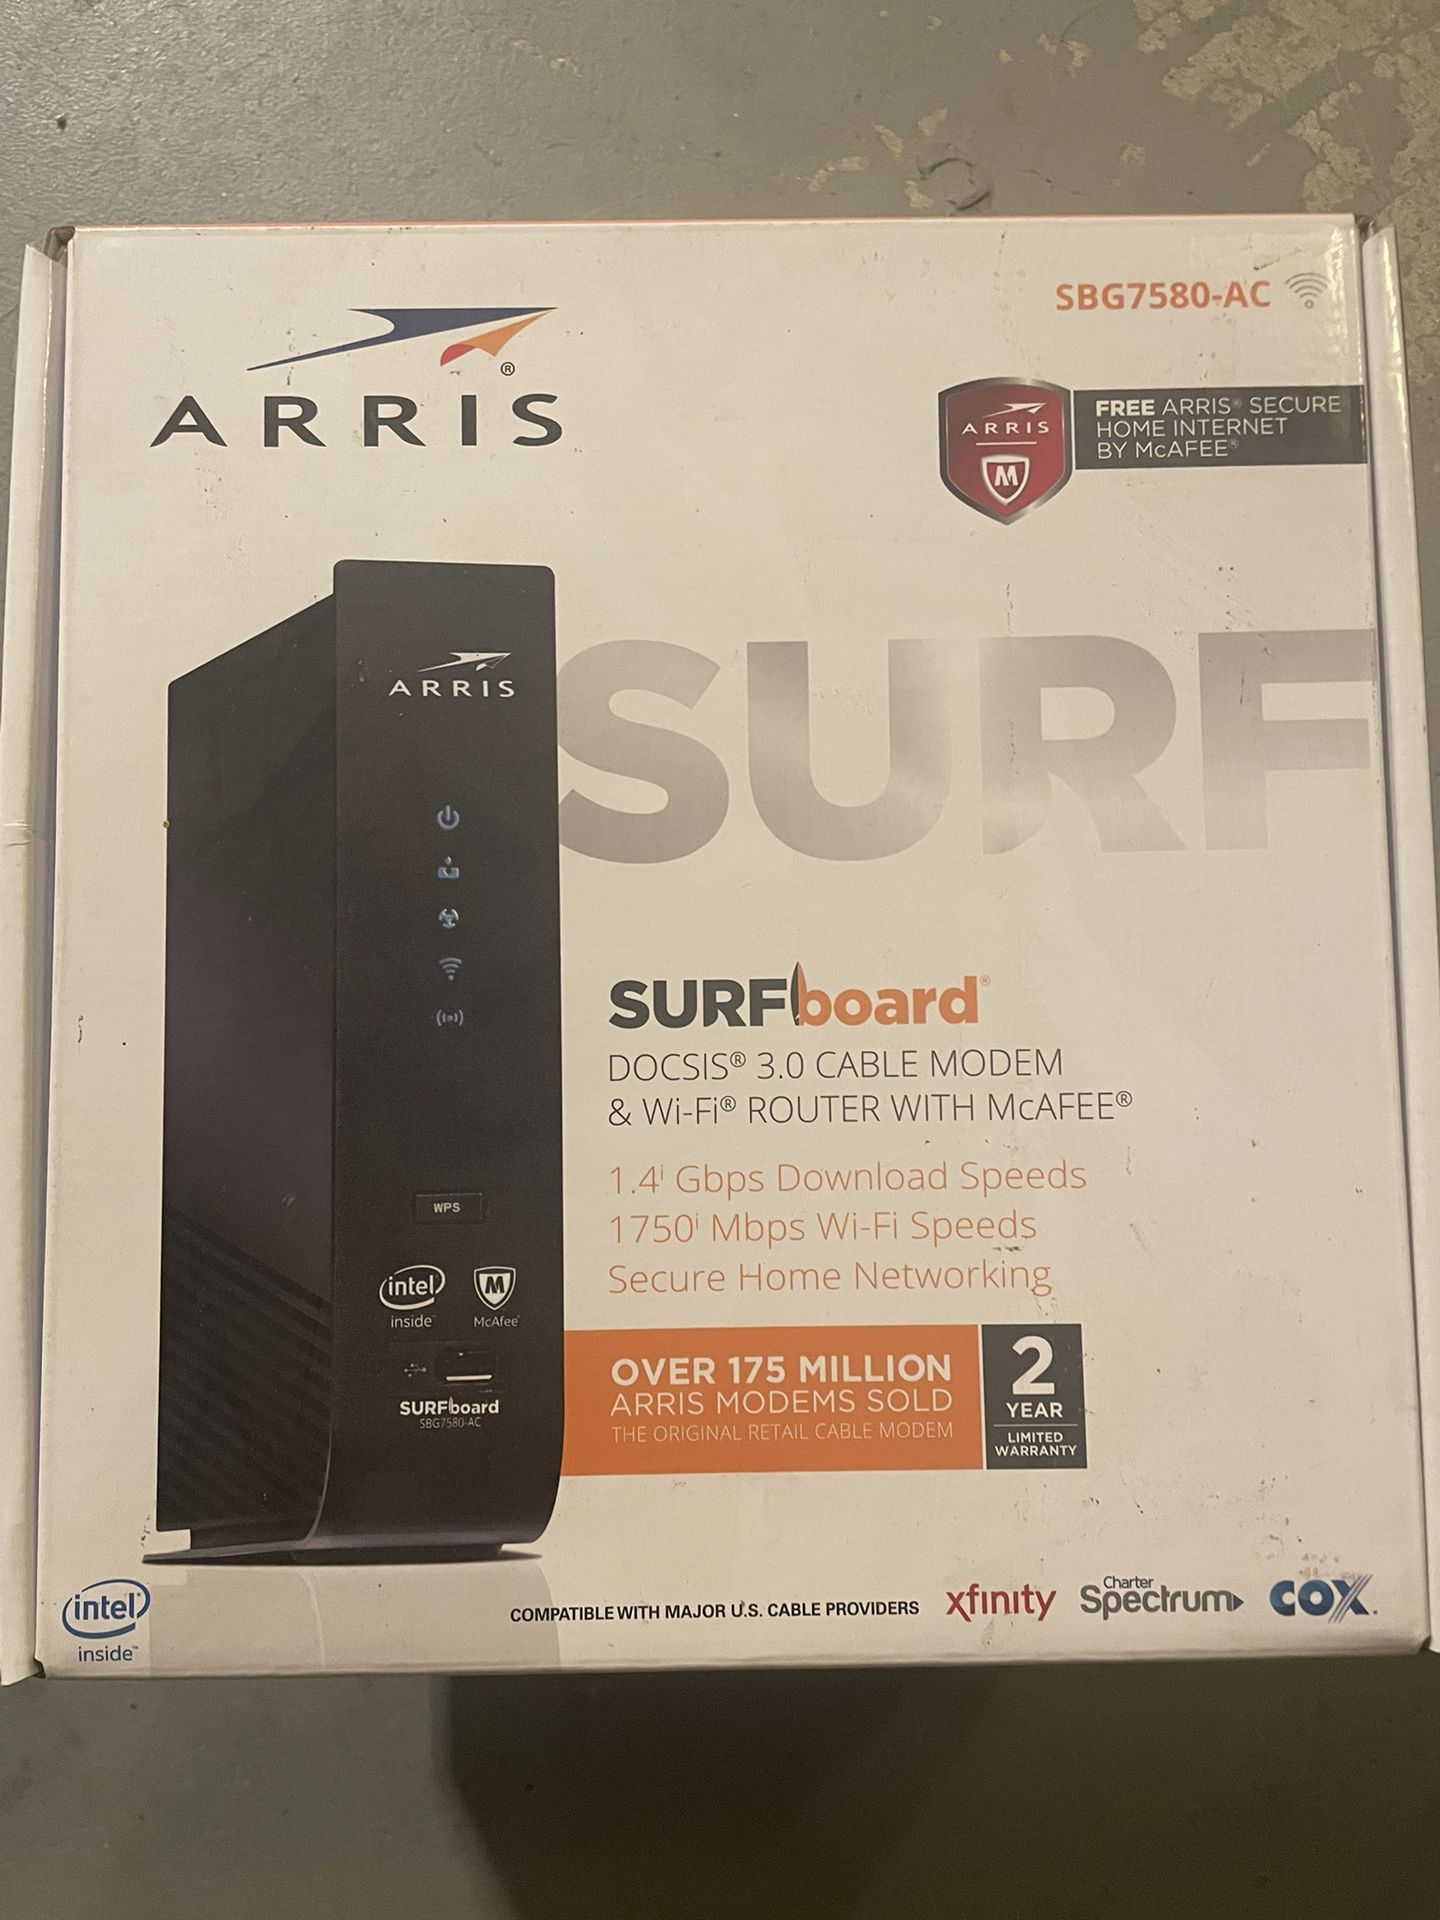 Arris - Surfboard Docs is 3.0 Cable Modem & WiFi Router